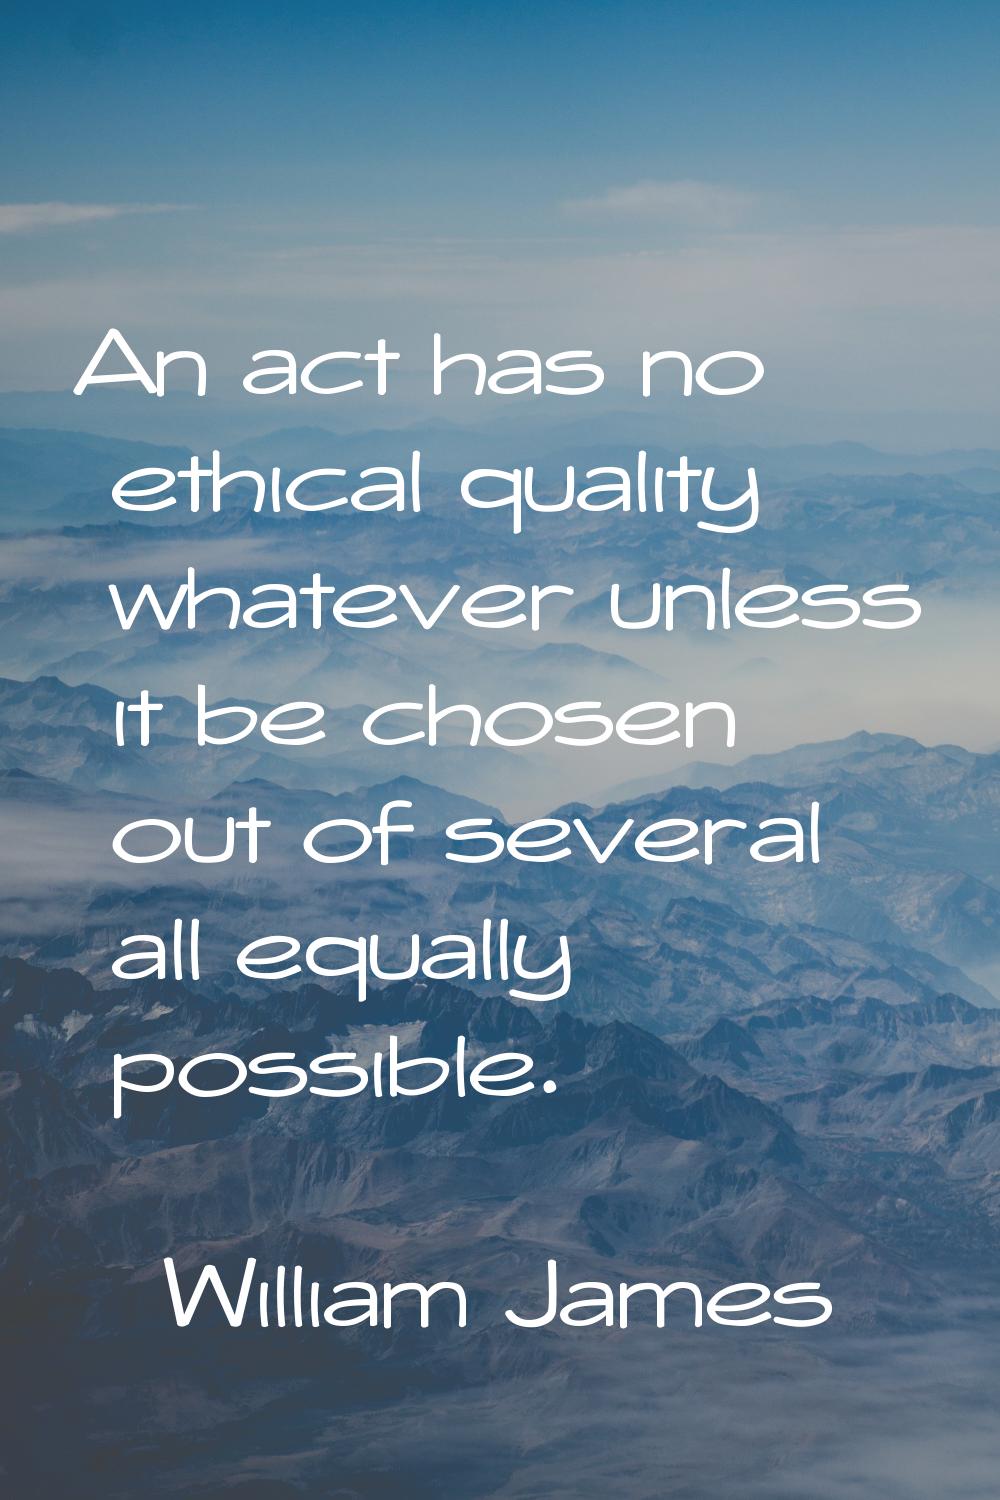 An act has no ethical quality whatever unless it be chosen out of several all equally possible.